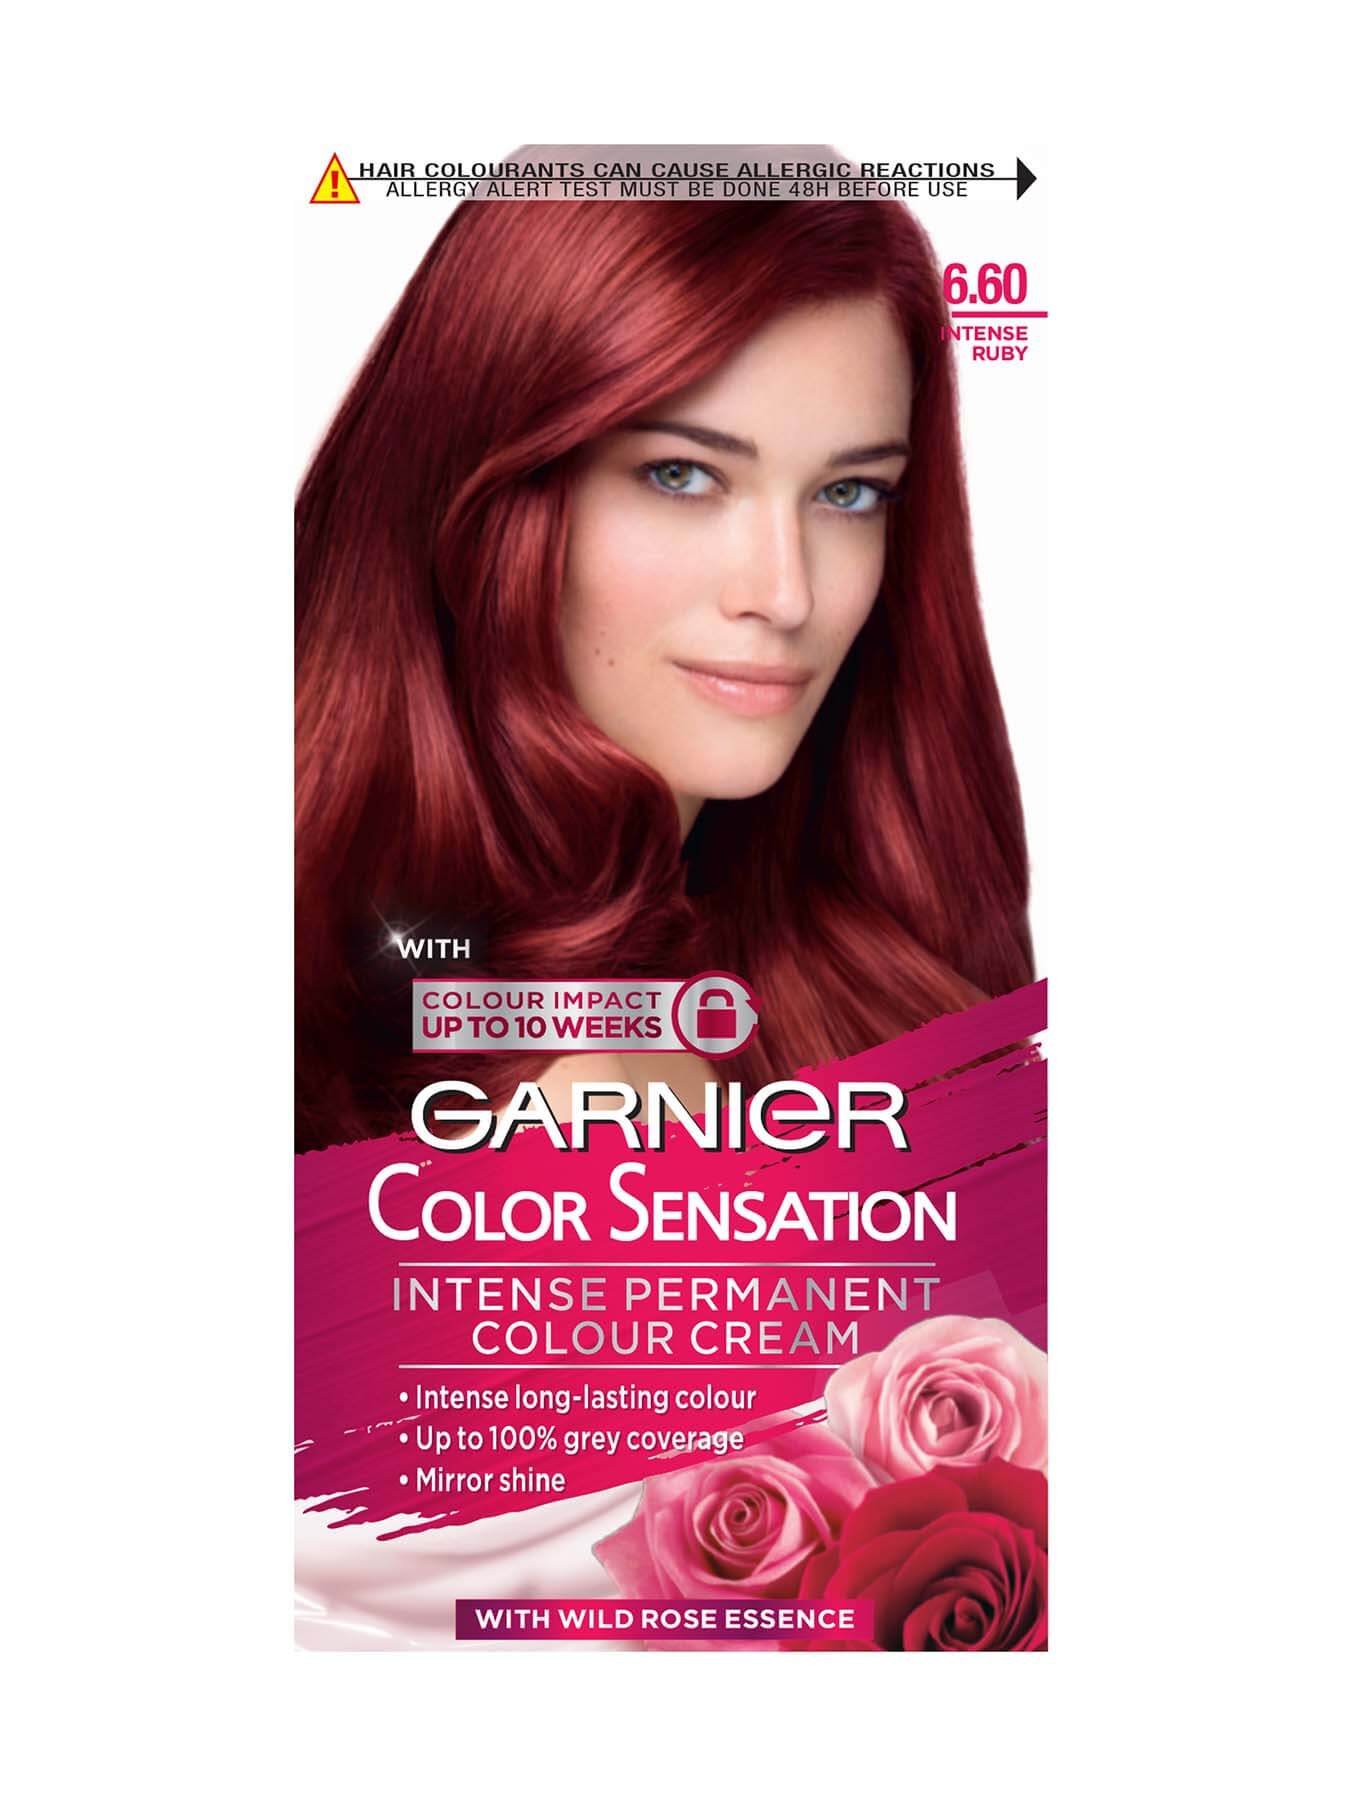 Red Hair Colors  Ideas for Fiery Results  Matrix